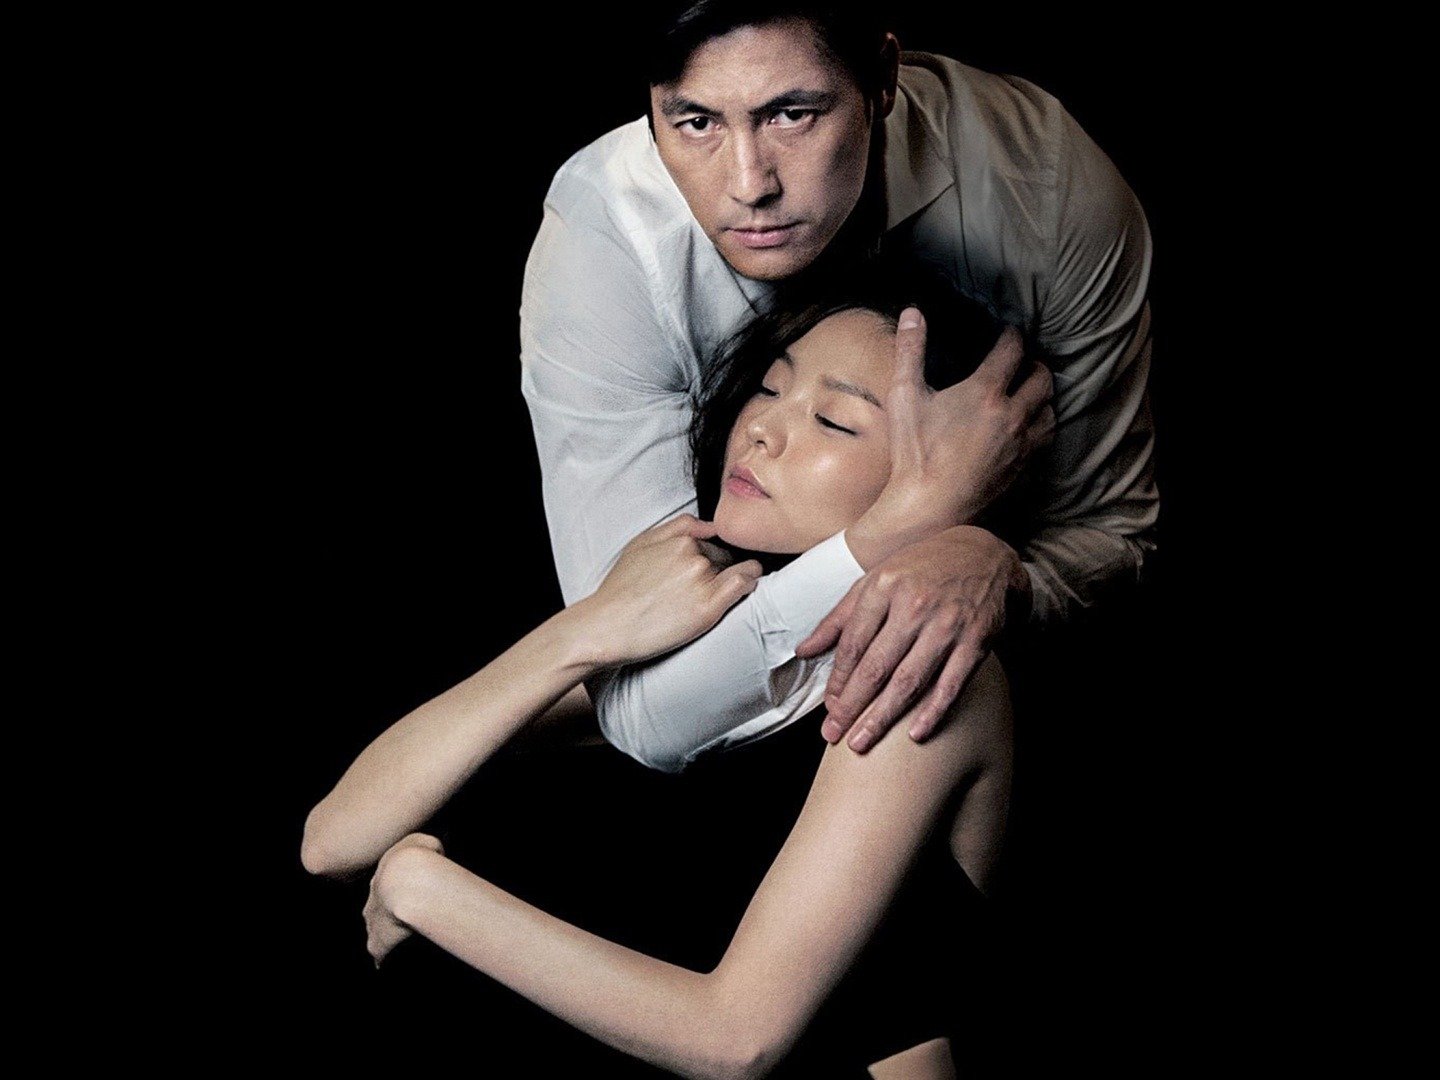 So-Young Park and Esom - Scarlet Innocence